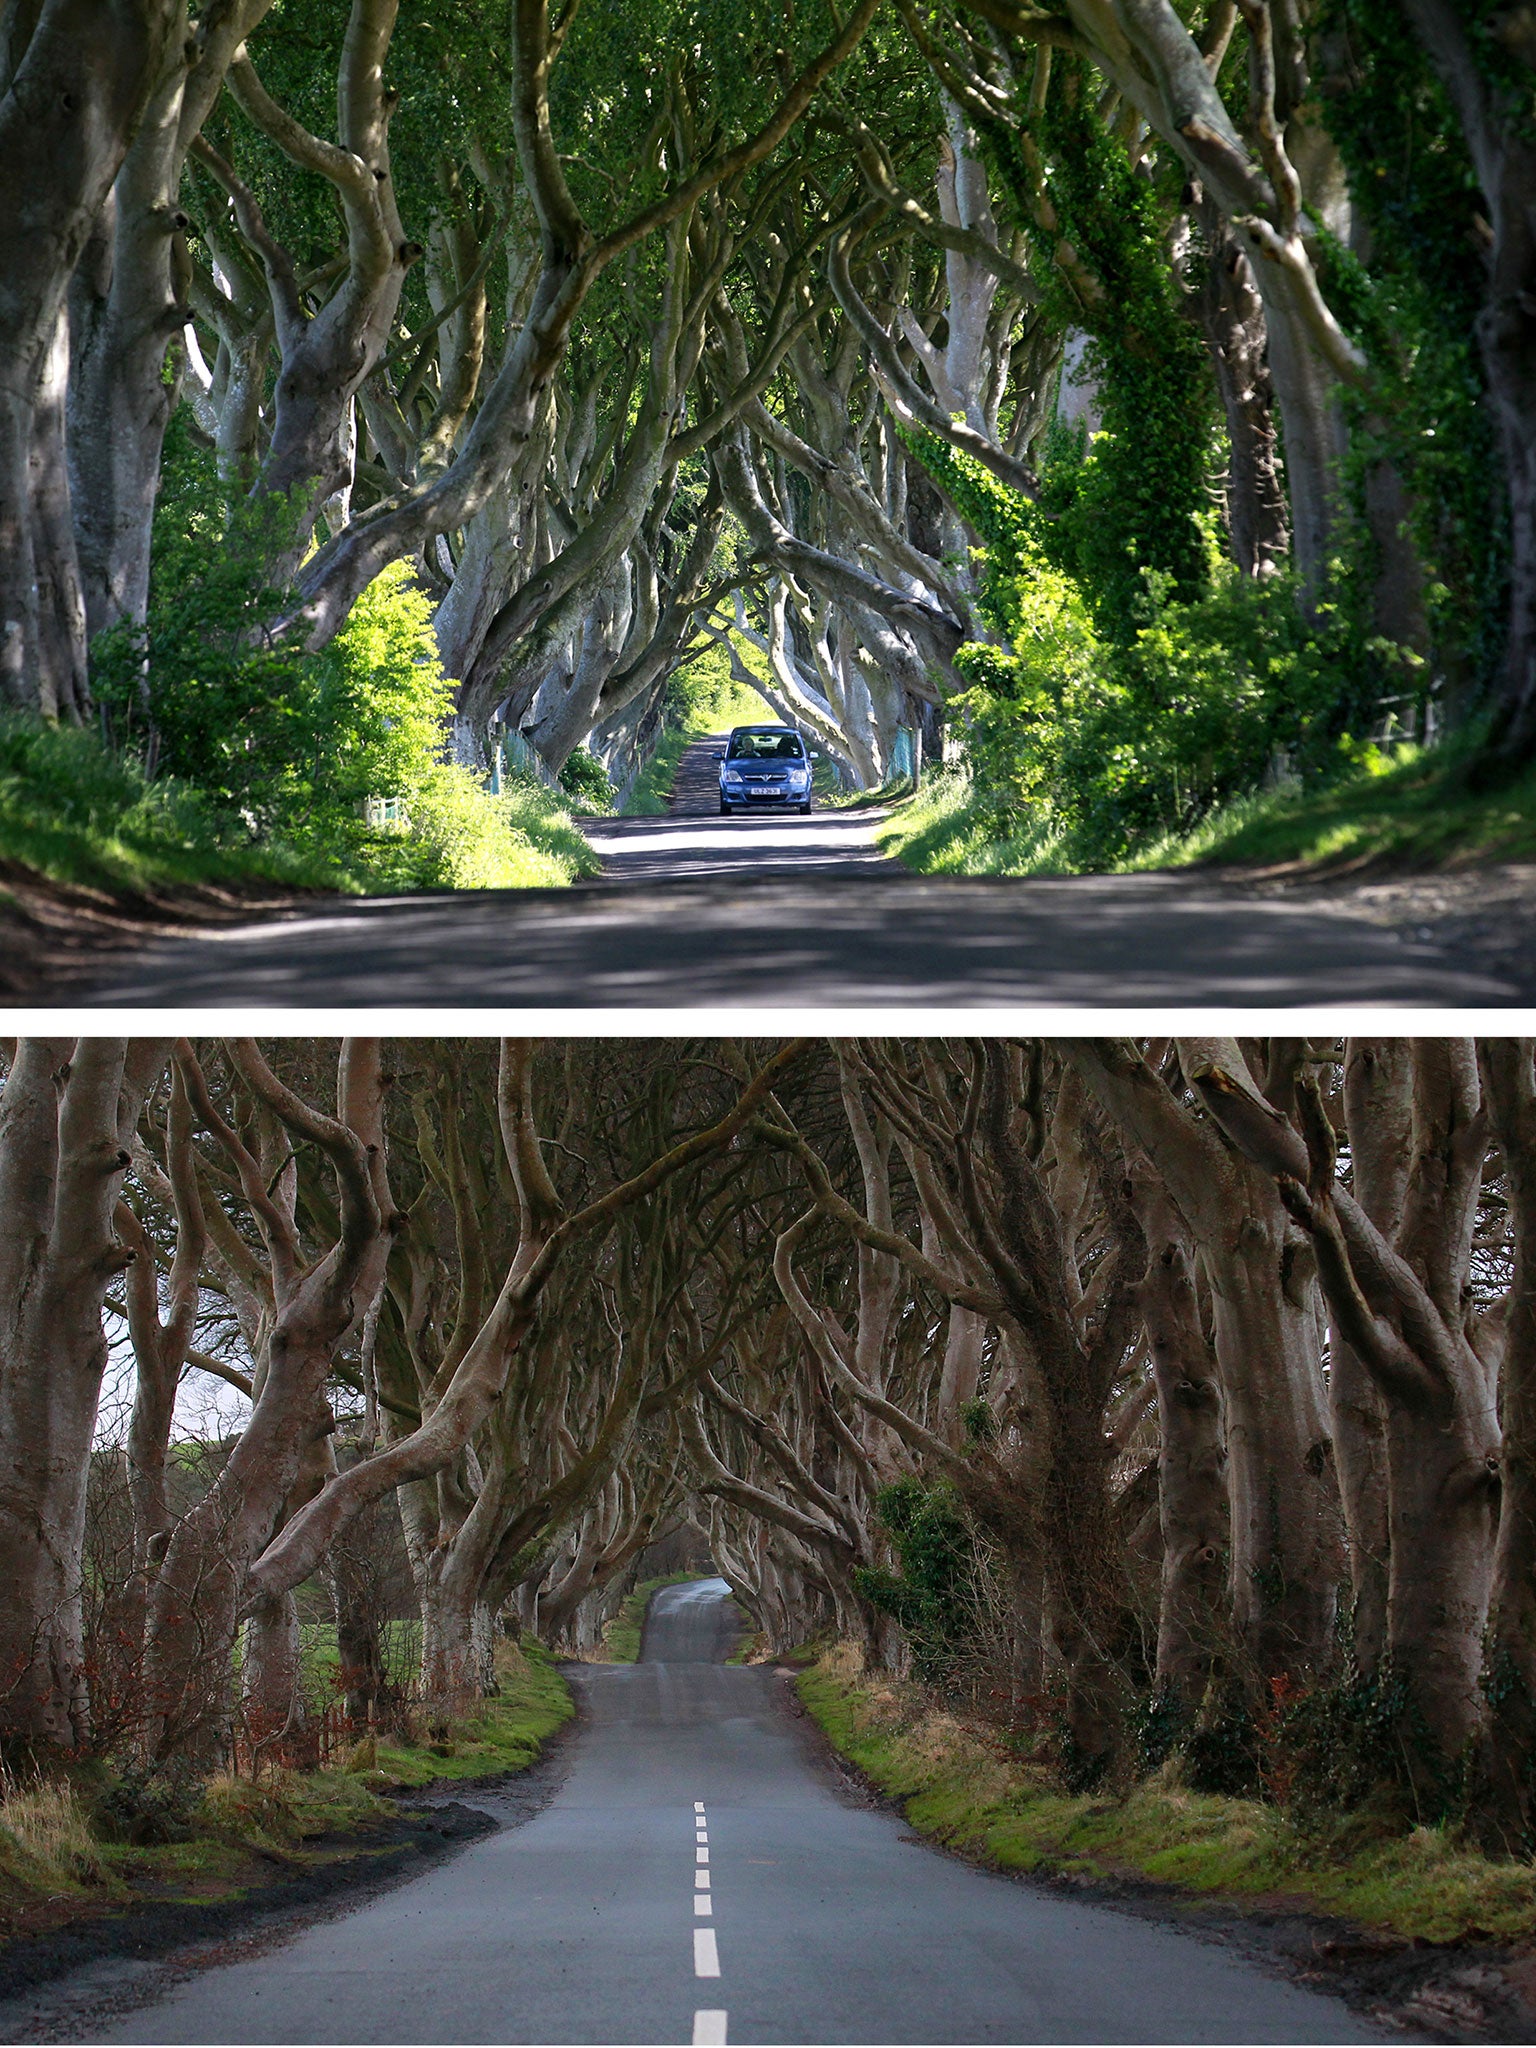 Before and after pictures showing the road markings along Dark Hedges